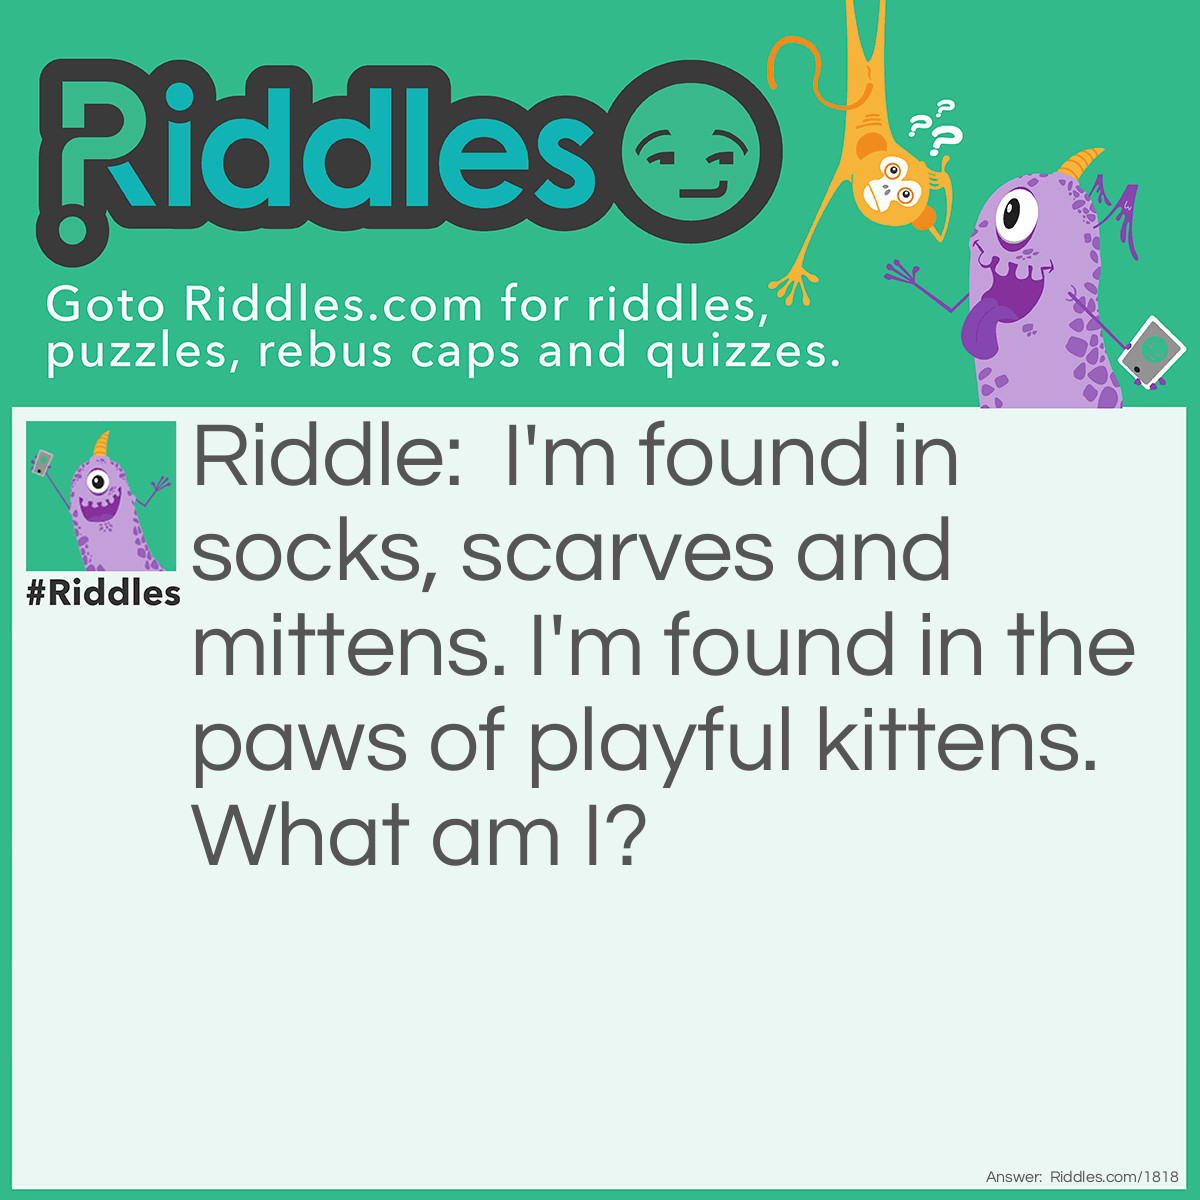 Riddle: I'm found in socks, scarves and mittens. I'm found in the paws of playful kittens. What am I? Answer: Yarn.